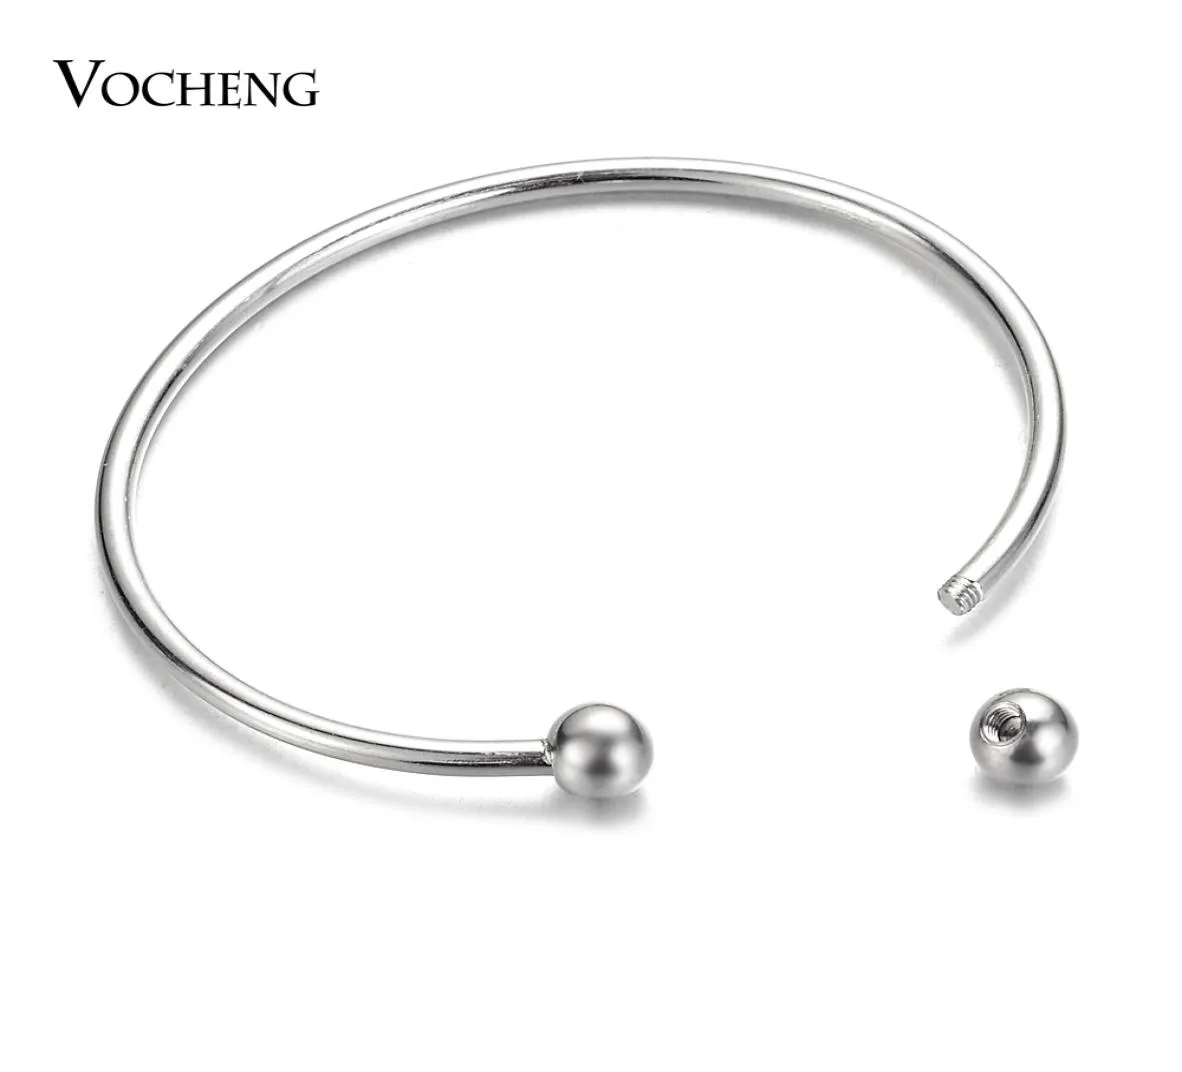 10pcslot Stainless Steel Minimalist Unisex Torque Cuff Bangle with Remove Beads Ends Charms Bracelet Bangles Gift SL02110 Y11261243540503